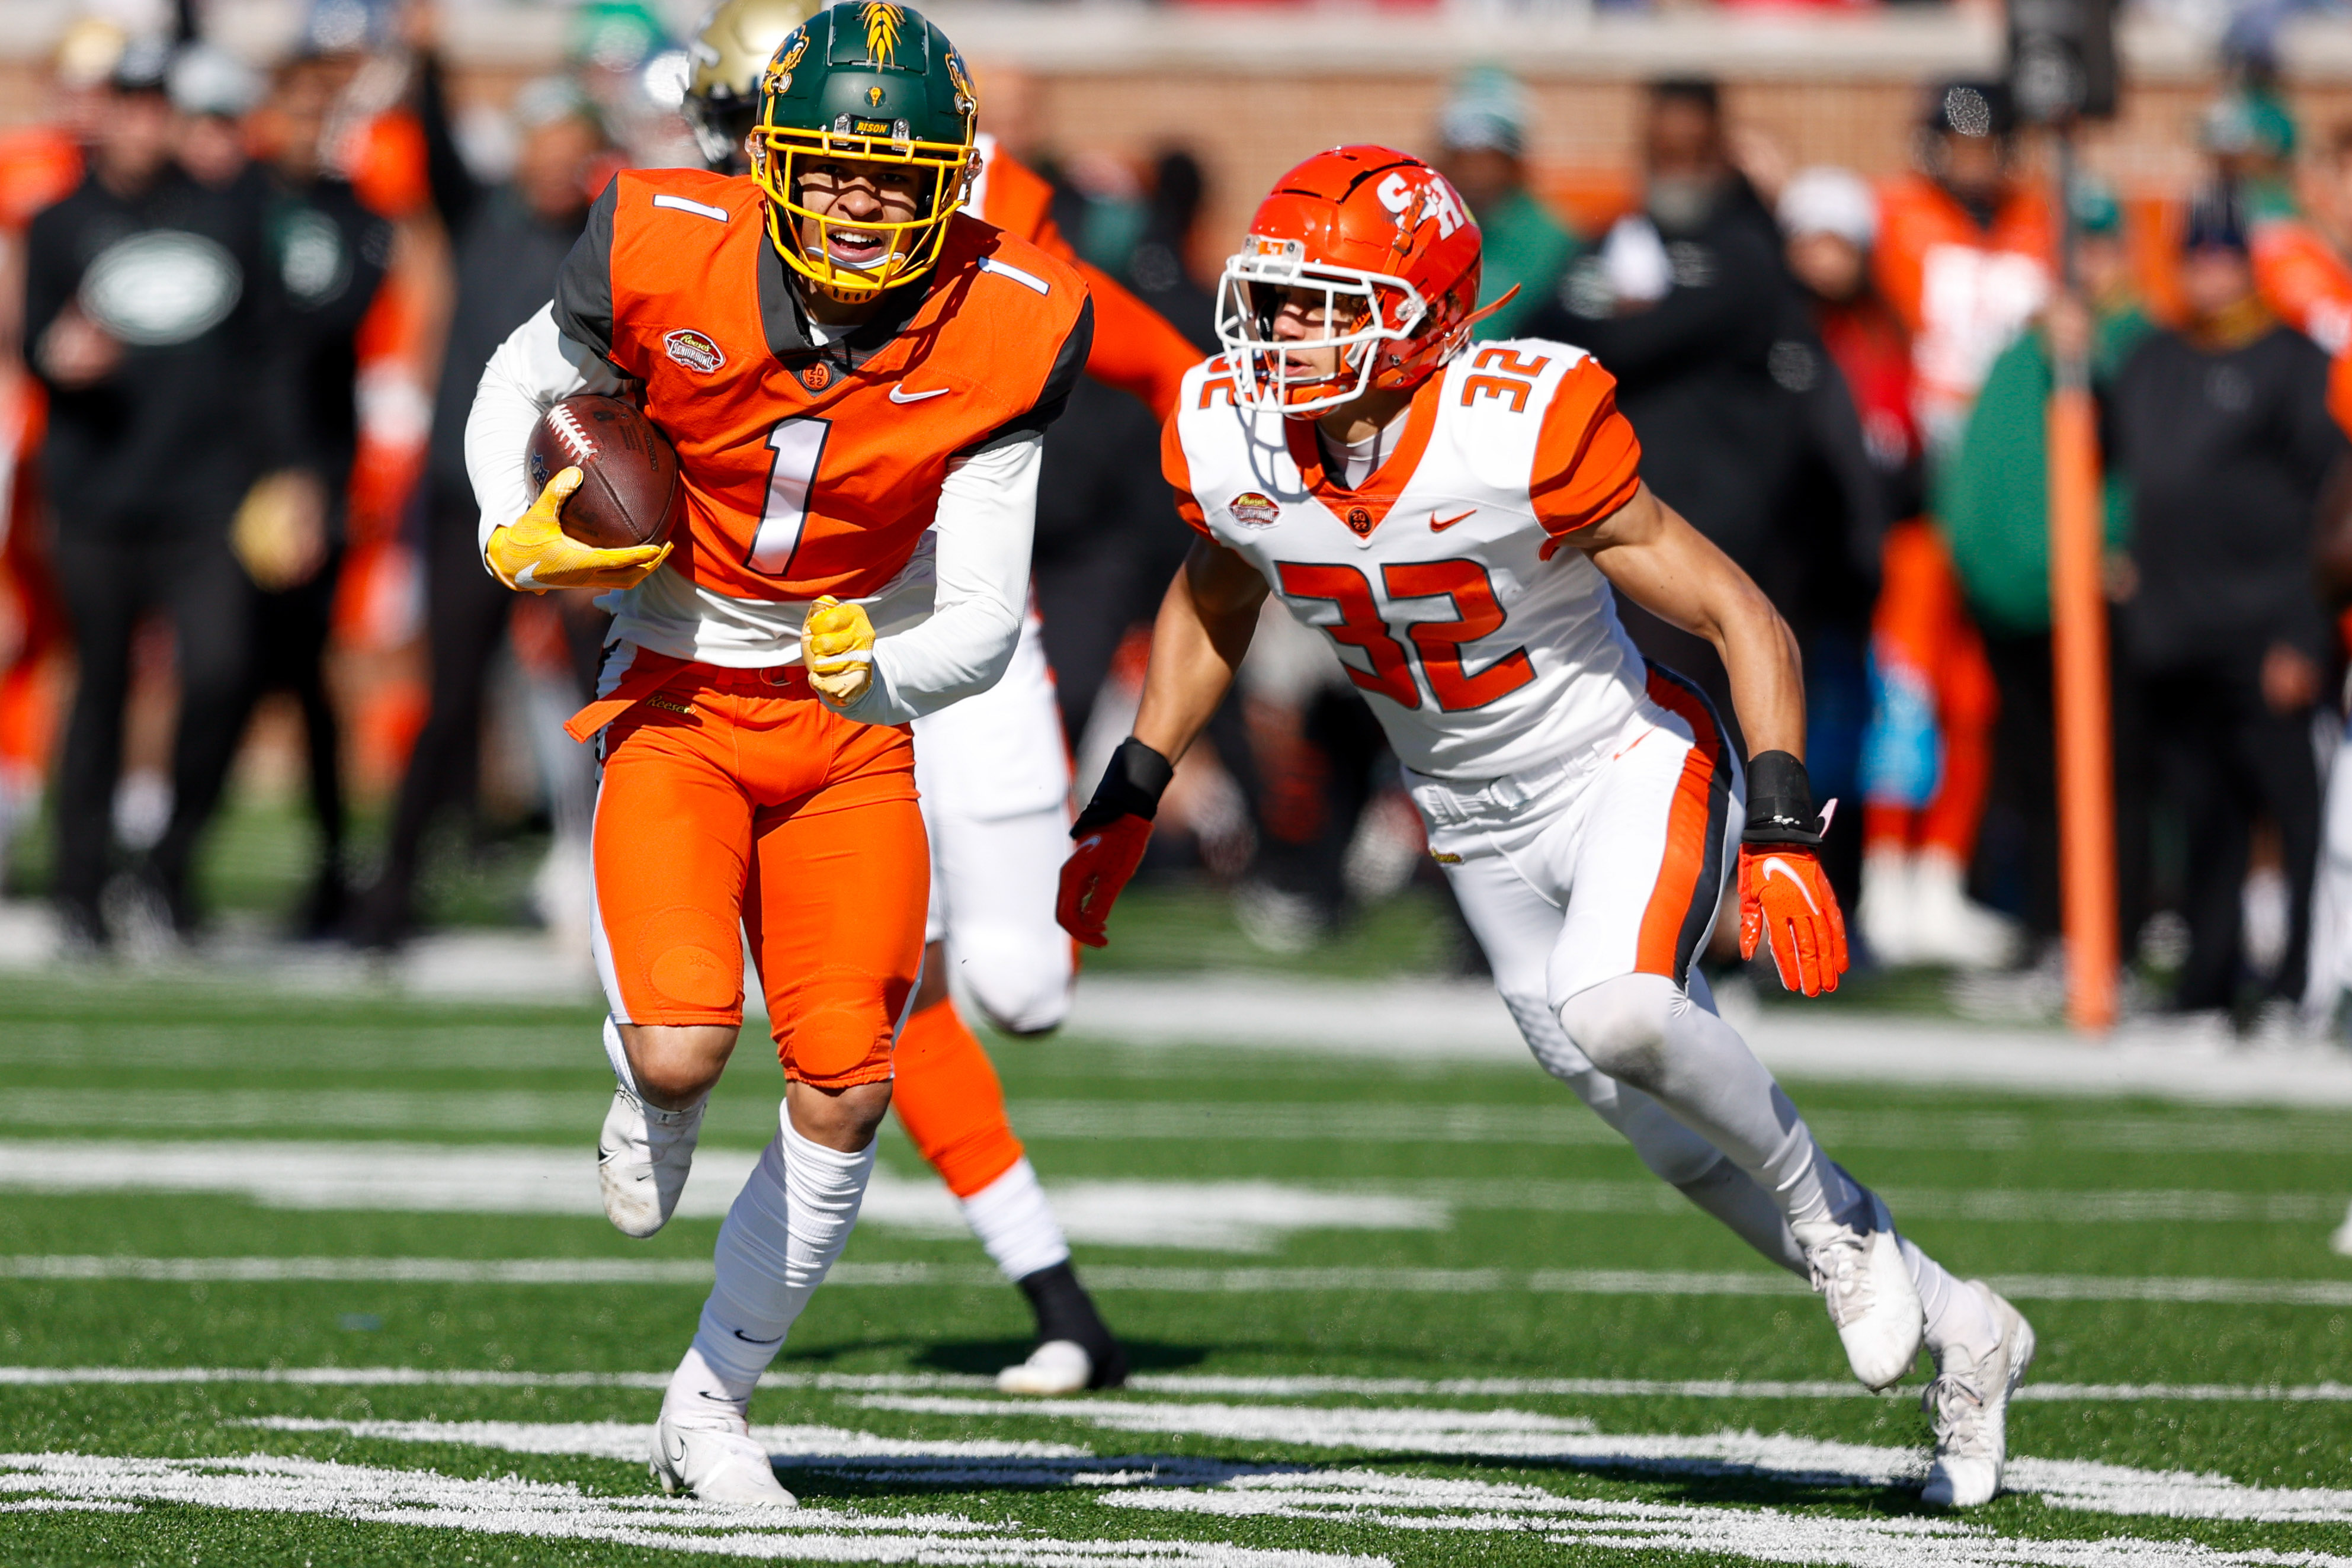 National Squad wide receiver Christian Watson of North Dakota State (1) runs with the ball in the first half against the American squad during the Senior bowl at Hancock Whitney Stadium.&nbsp;